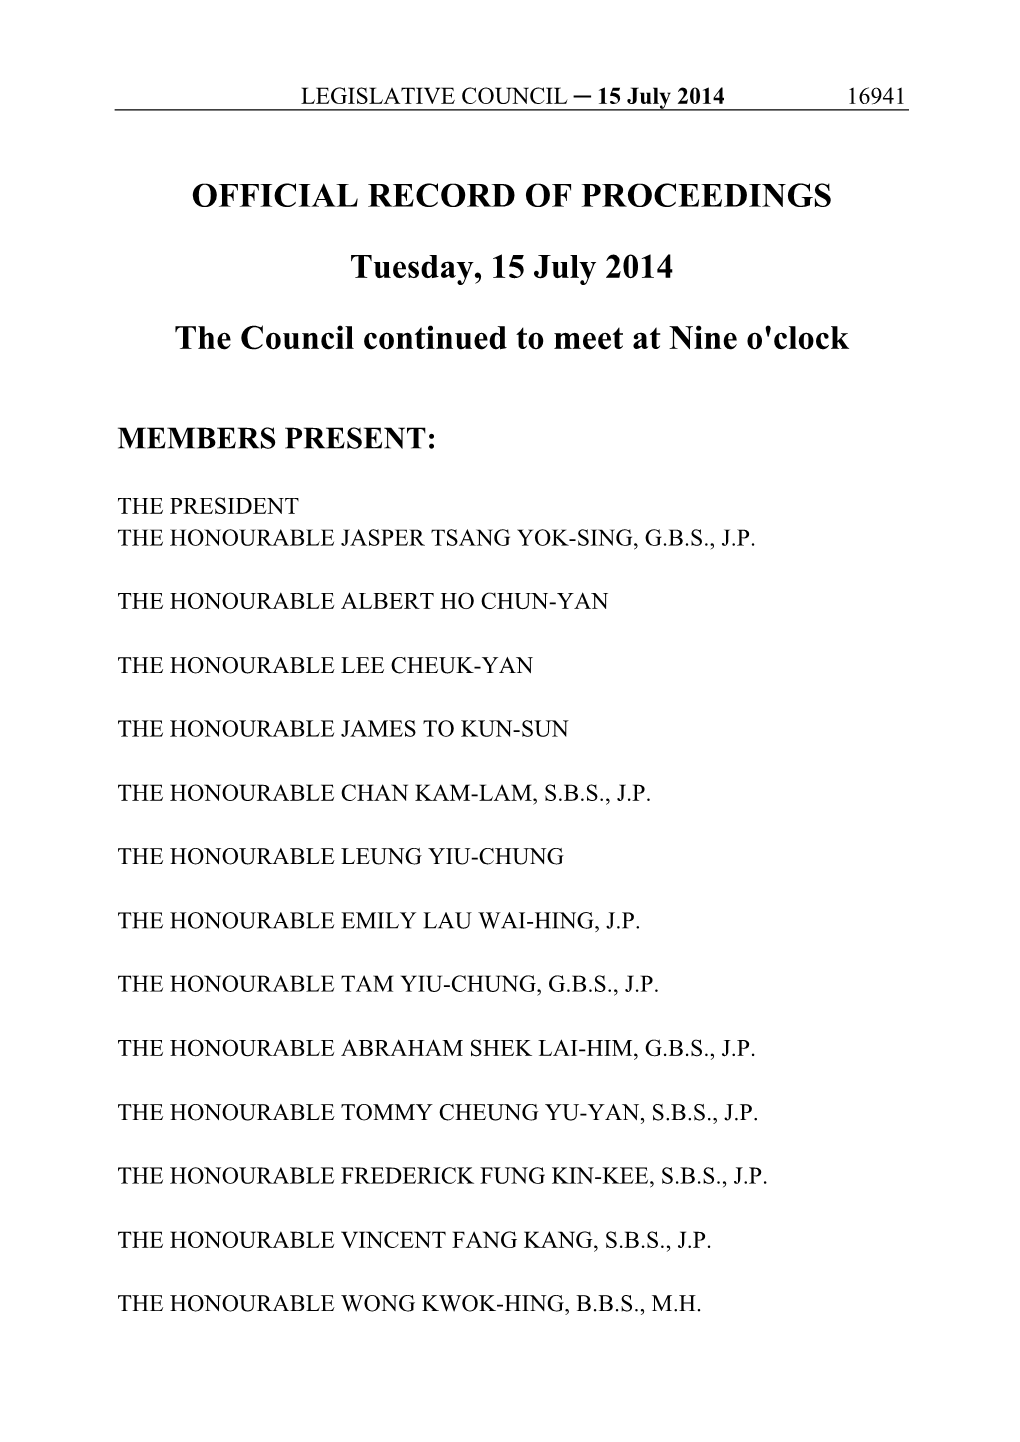 OFFICIAL RECORD of PROCEEDINGS Tuesday, 15 July